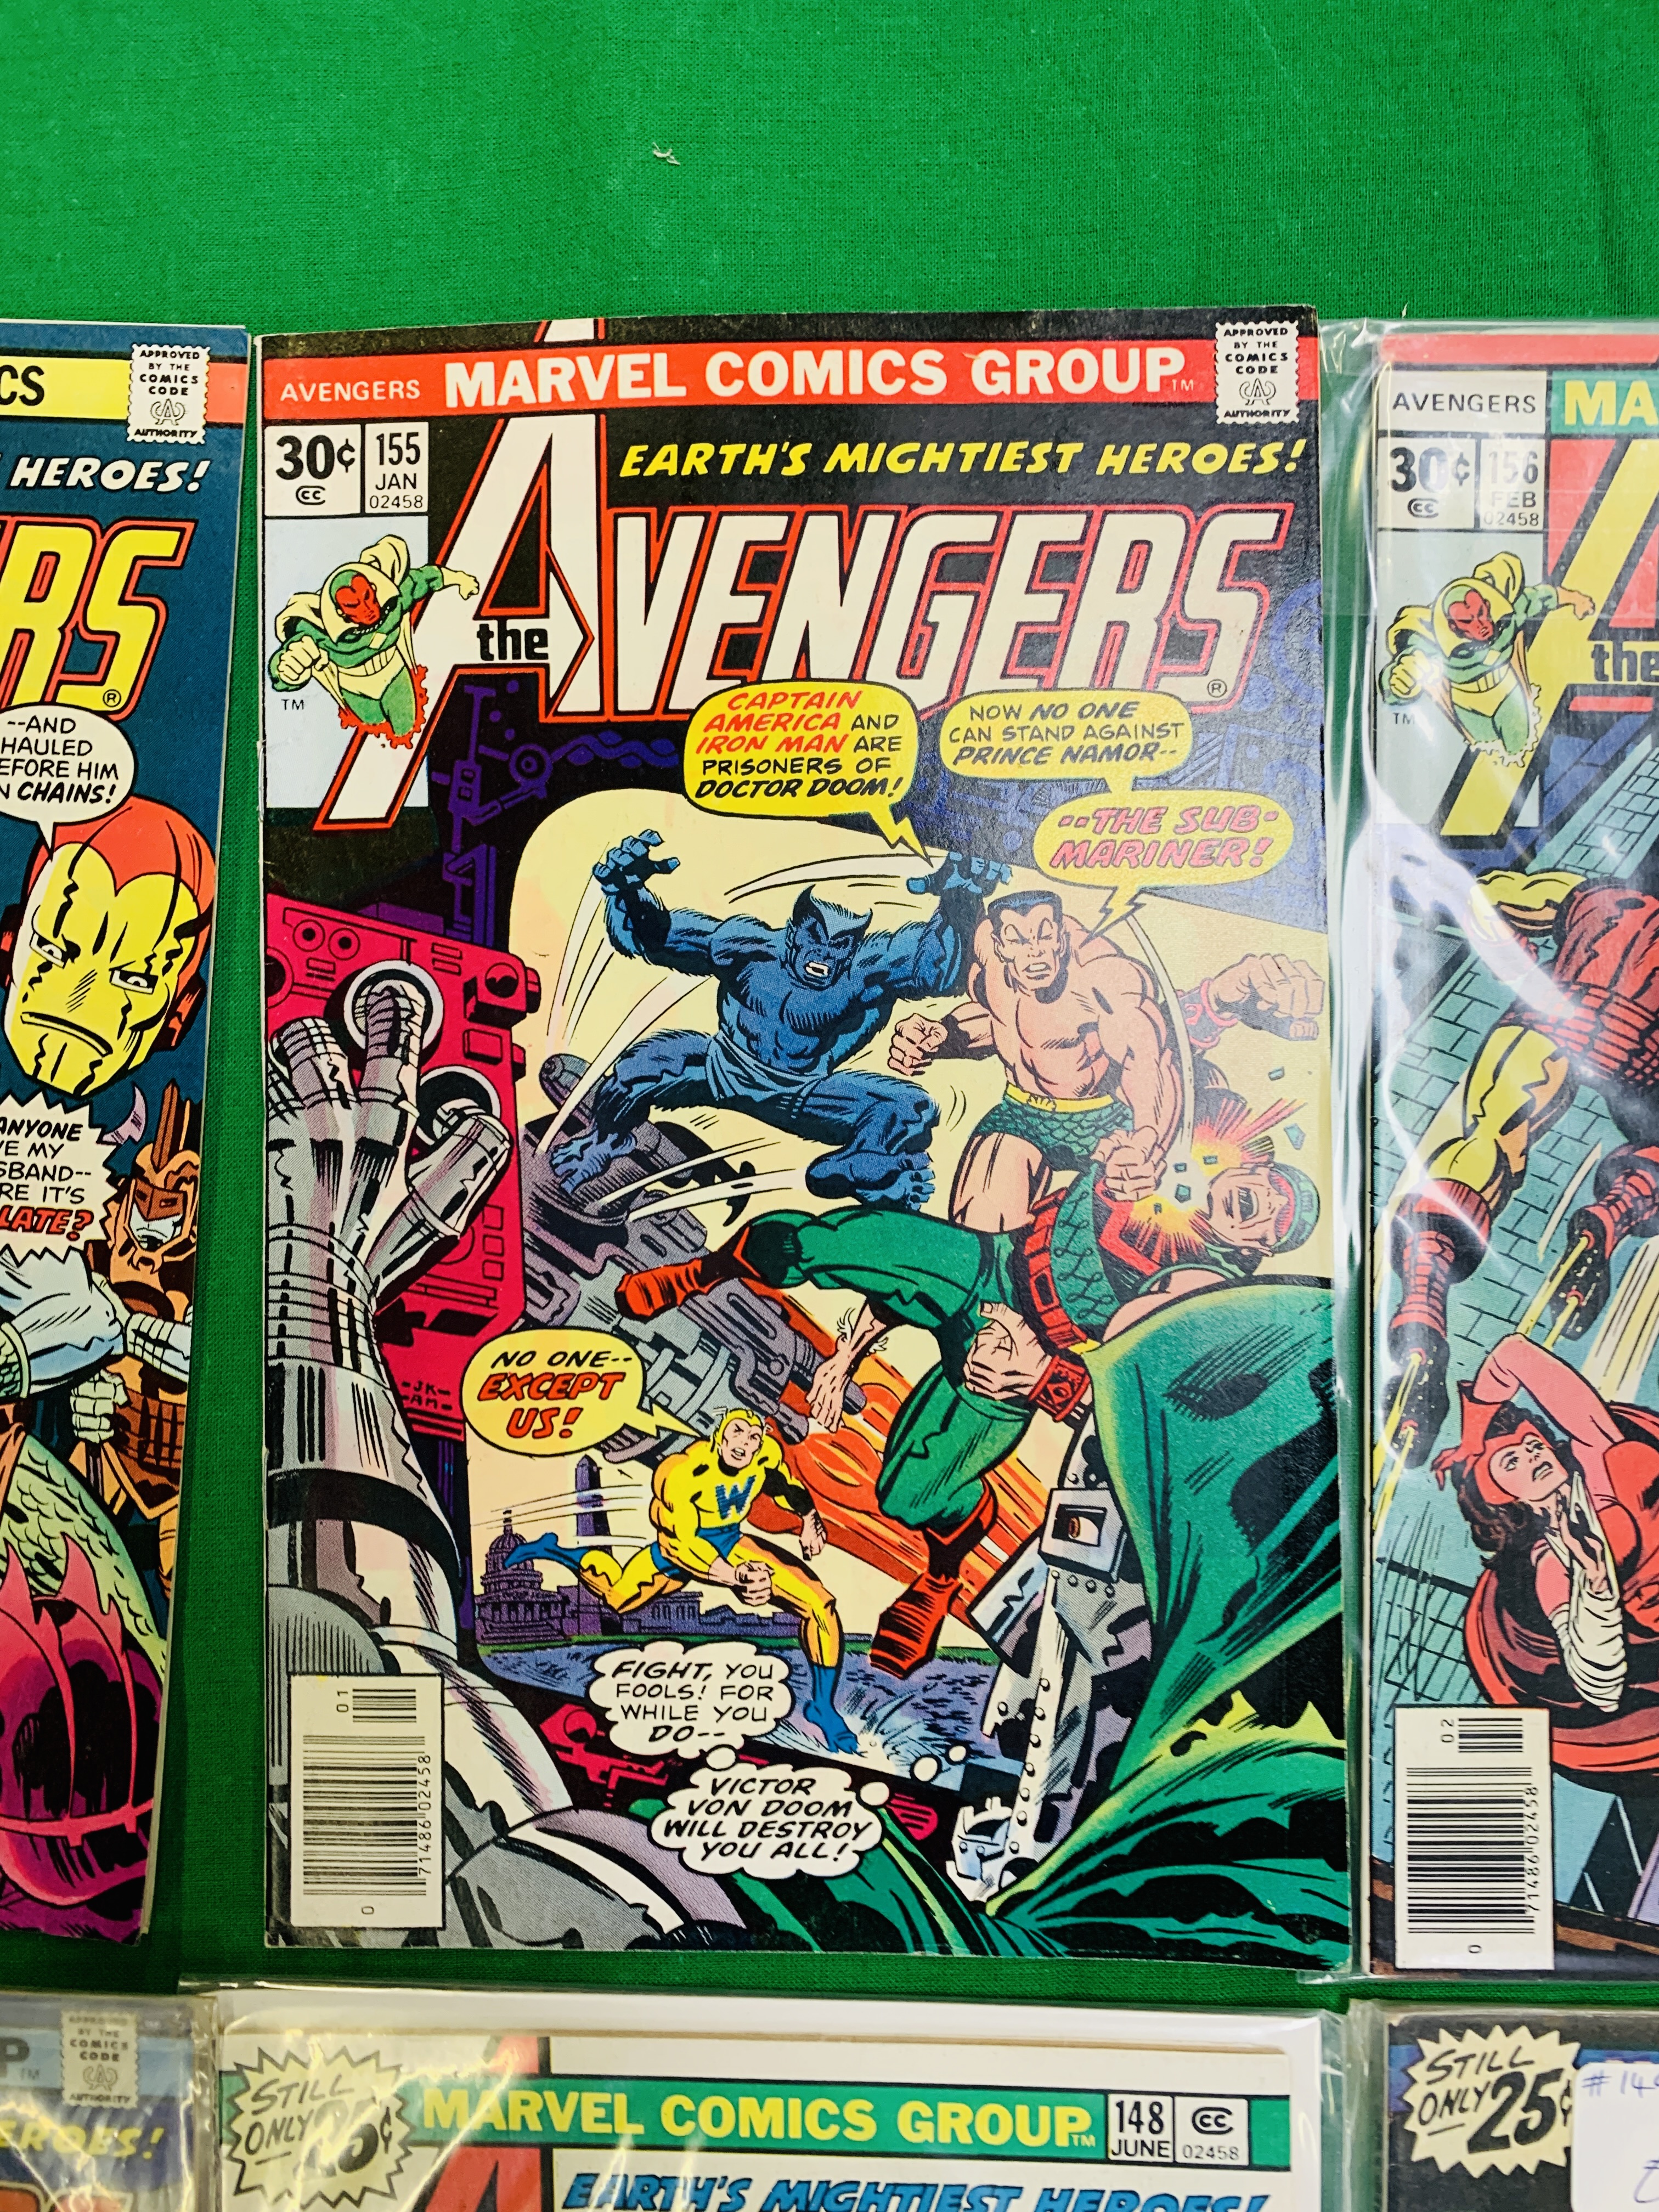 MARVEL COMICS THE AVENGERS NO. 101 - 299, MISSING ISSUES 103 AND 110. - Image 43 of 130